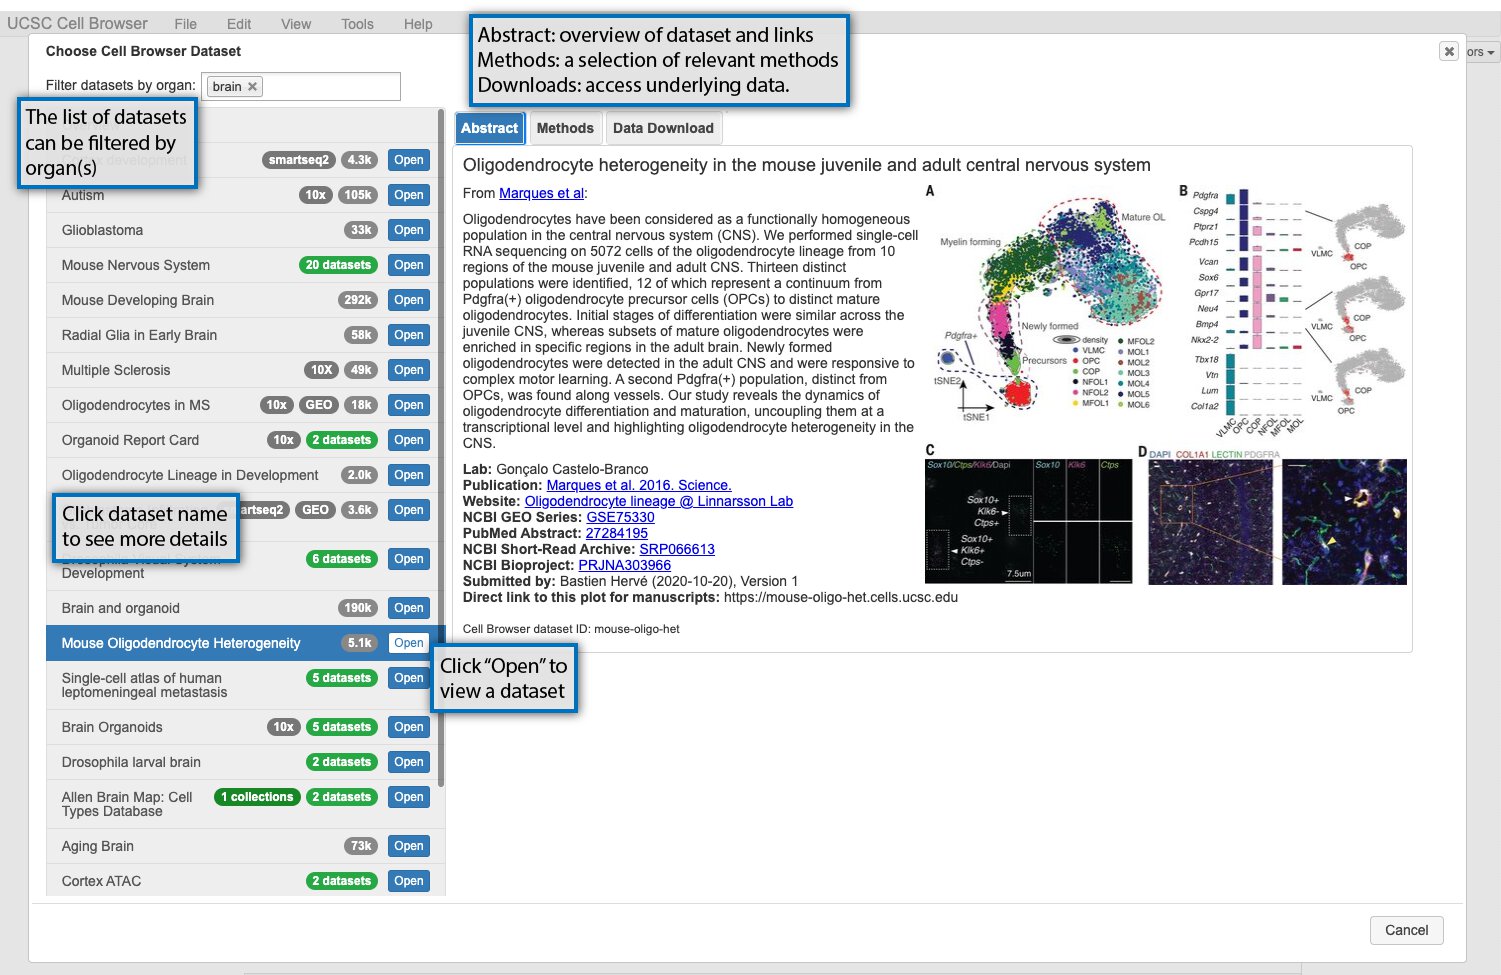 Image showing Cell Browser dataset select screen, with organ filter, dataset info pop-up, and dataset open button labeled